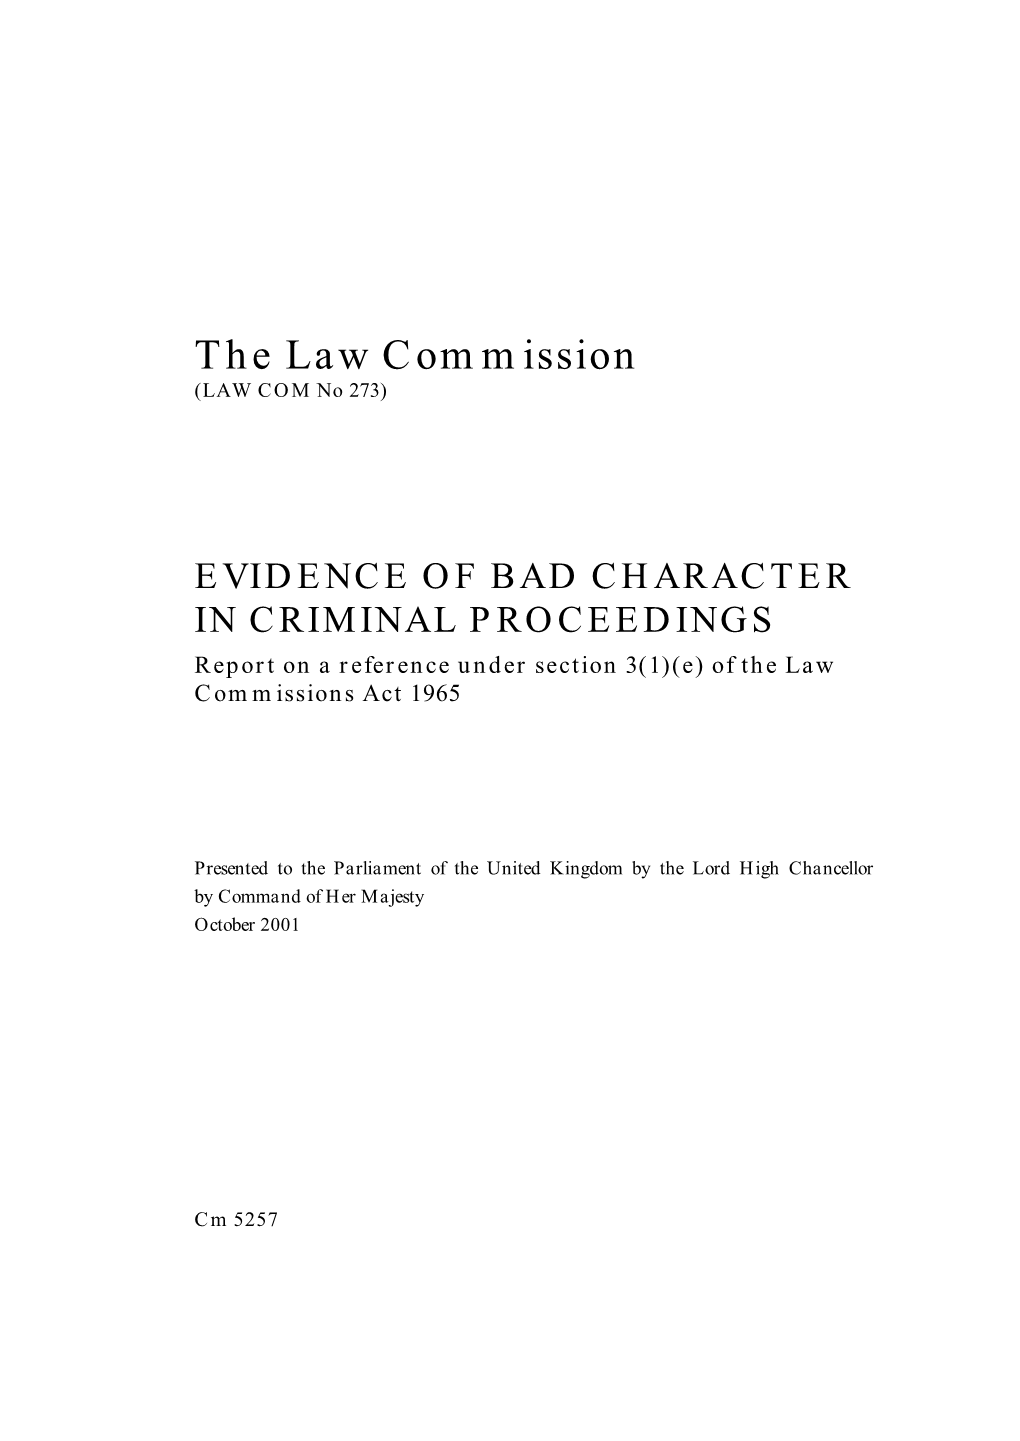 EVIDENCE of BAD CHARACTER in CRIMINAL PROCEEDINGS Report on a Reference Under Section 3(1)(E) of the Law Commissions Act 1965